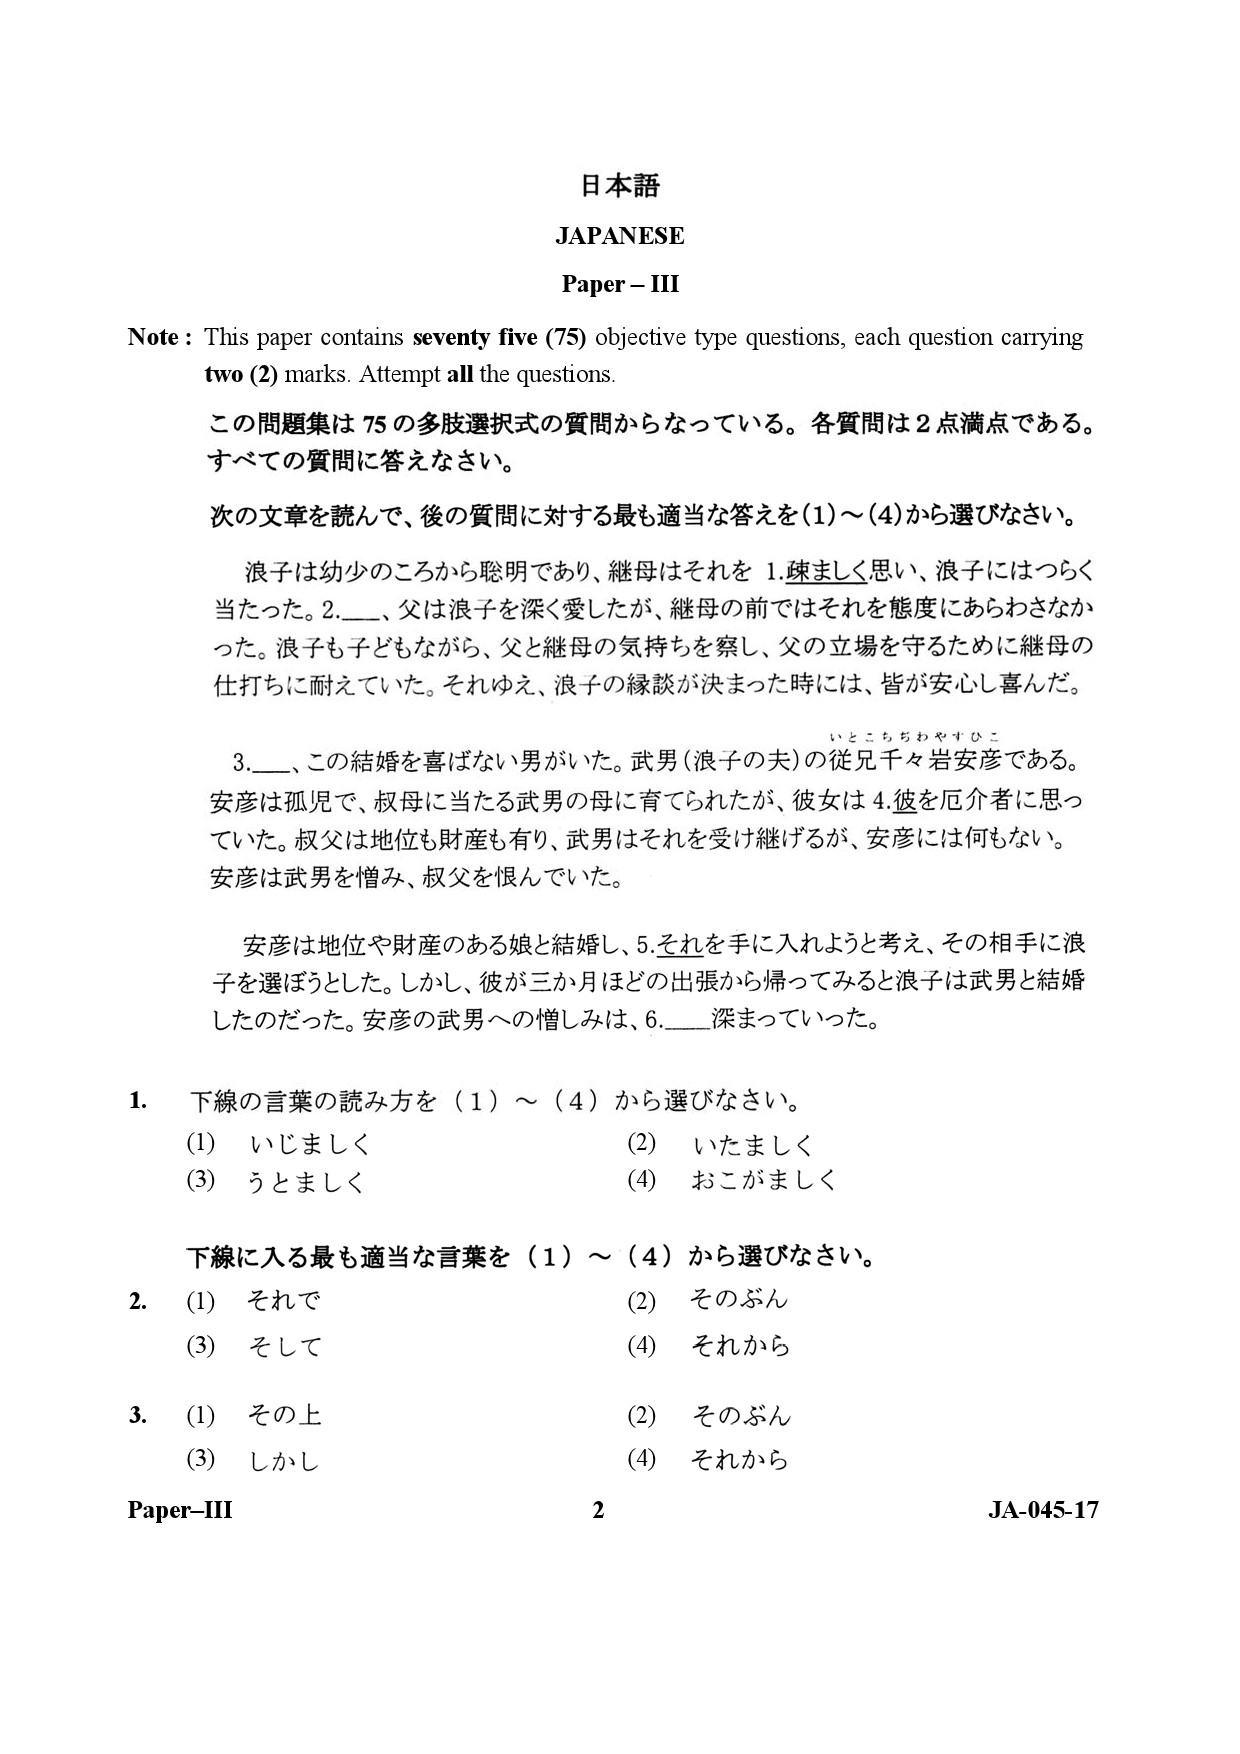 Japanese Question Paper Iii January 17 Ugc Net Previous Question Papers